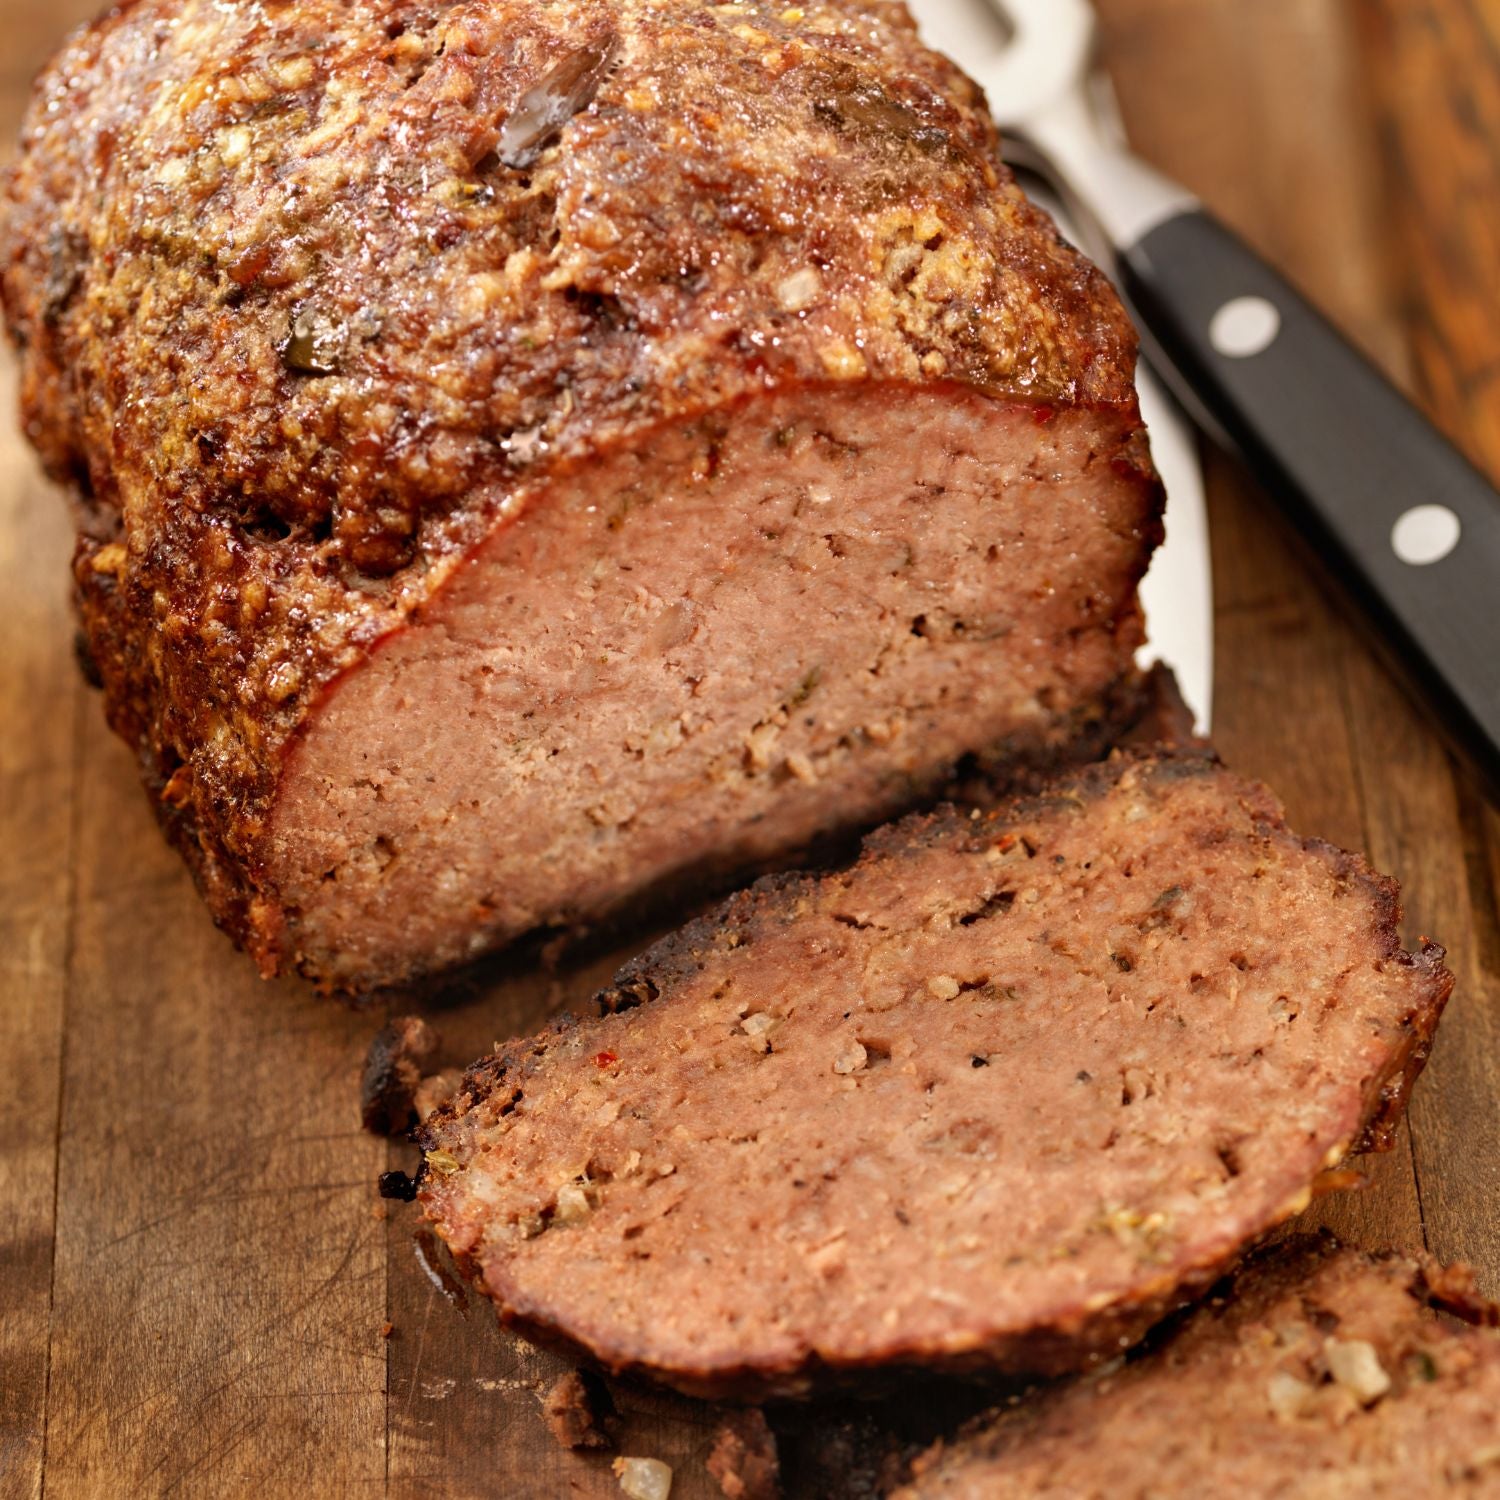 A delicious and classic meatloaf recipe with a golden brown crust